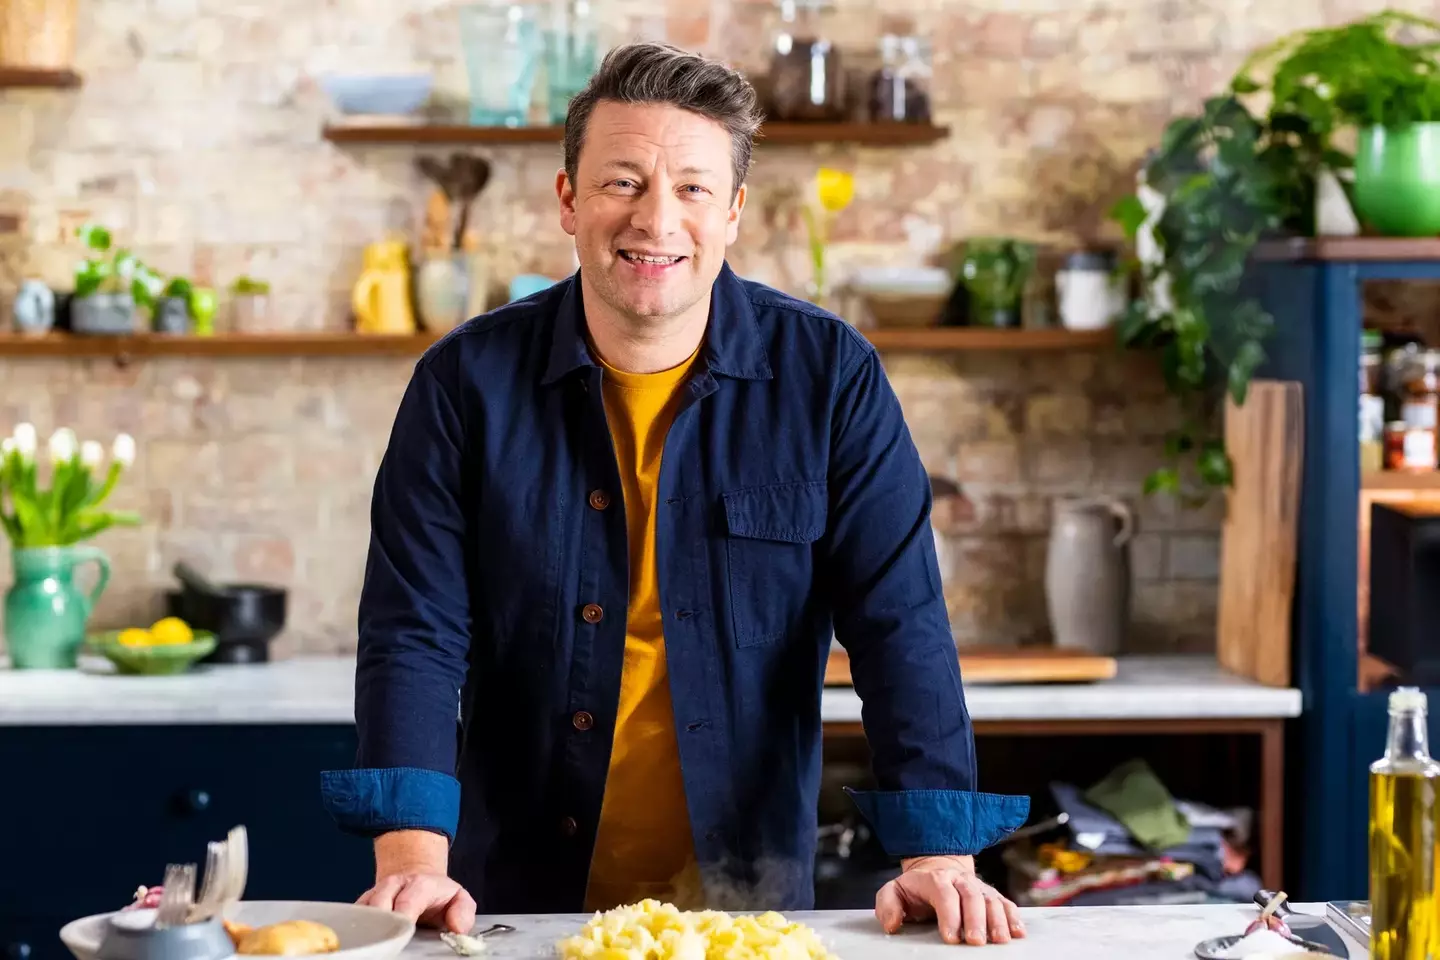 Jamie Oliver's latest cooking show is £1 Wonders.